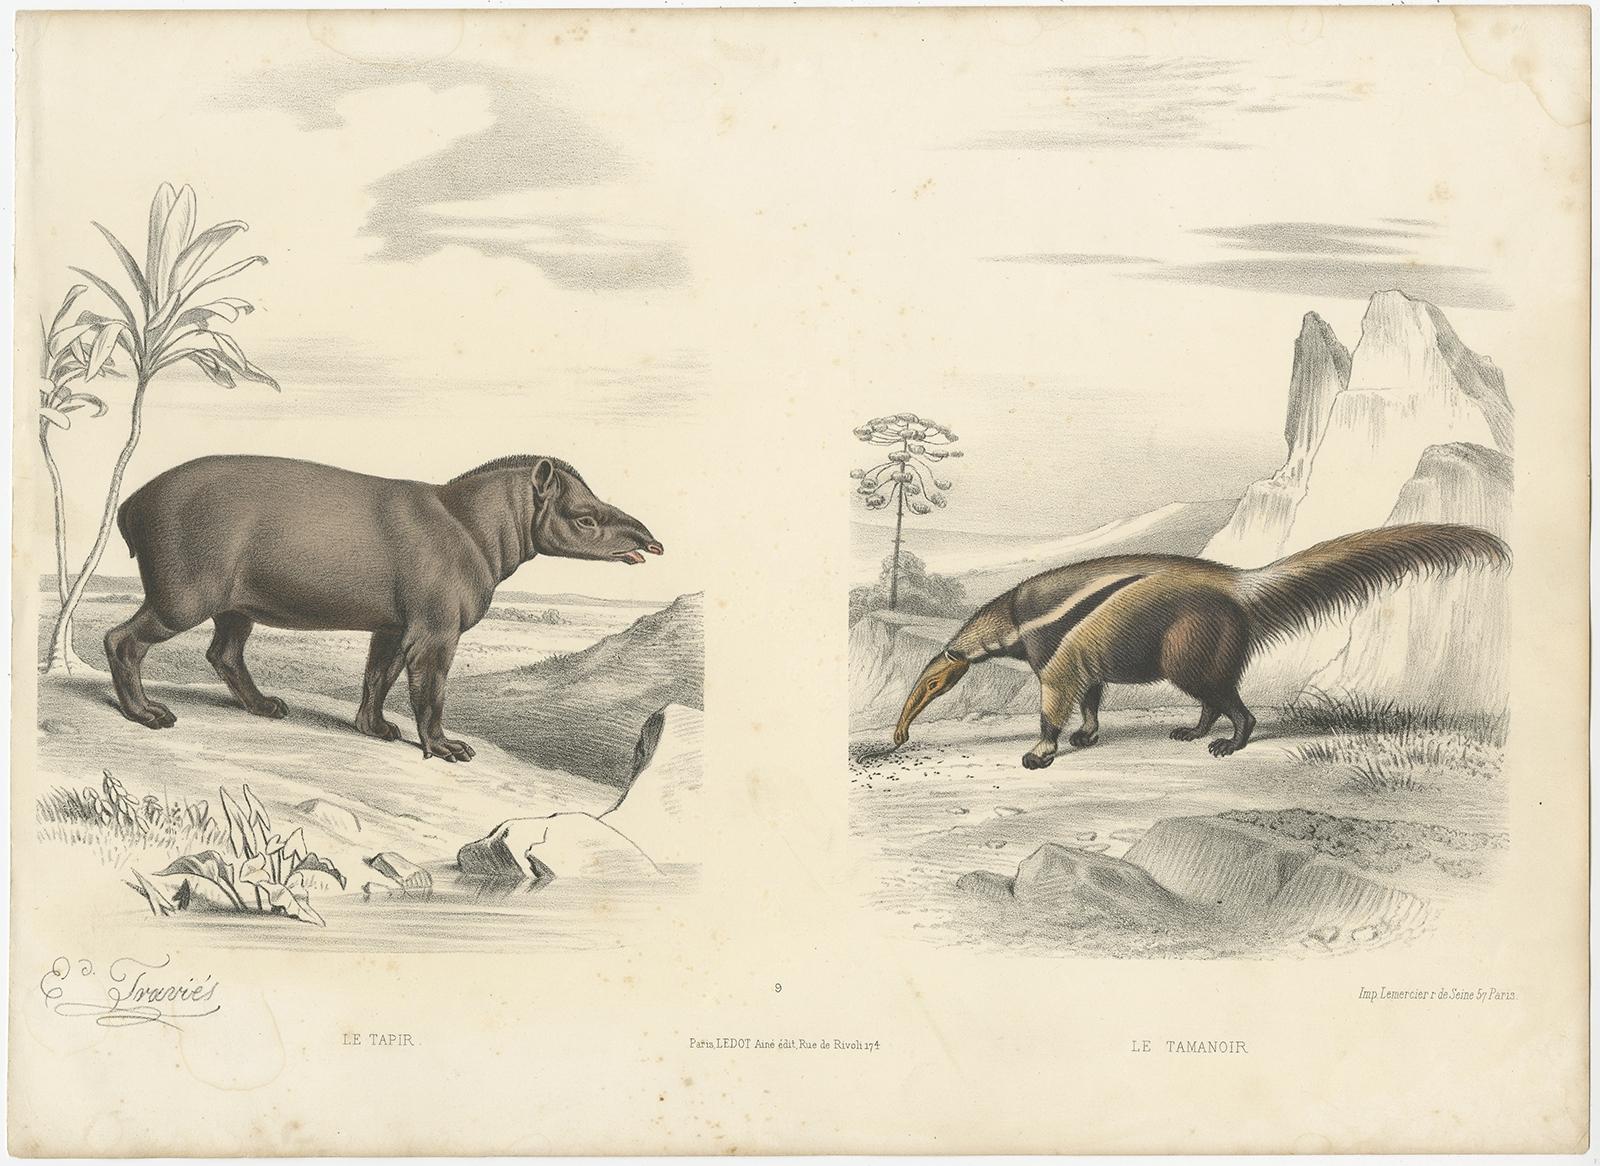 Antique print titled 'Le Tapir - Le Tamanoir'. 

Old print of a tapir and an anteater. This print originates from 'Types du regne animal; Buffon en estampes', a book with 48 hand-colored plates of animals.

Artists and Engravers: Édouard Traviès